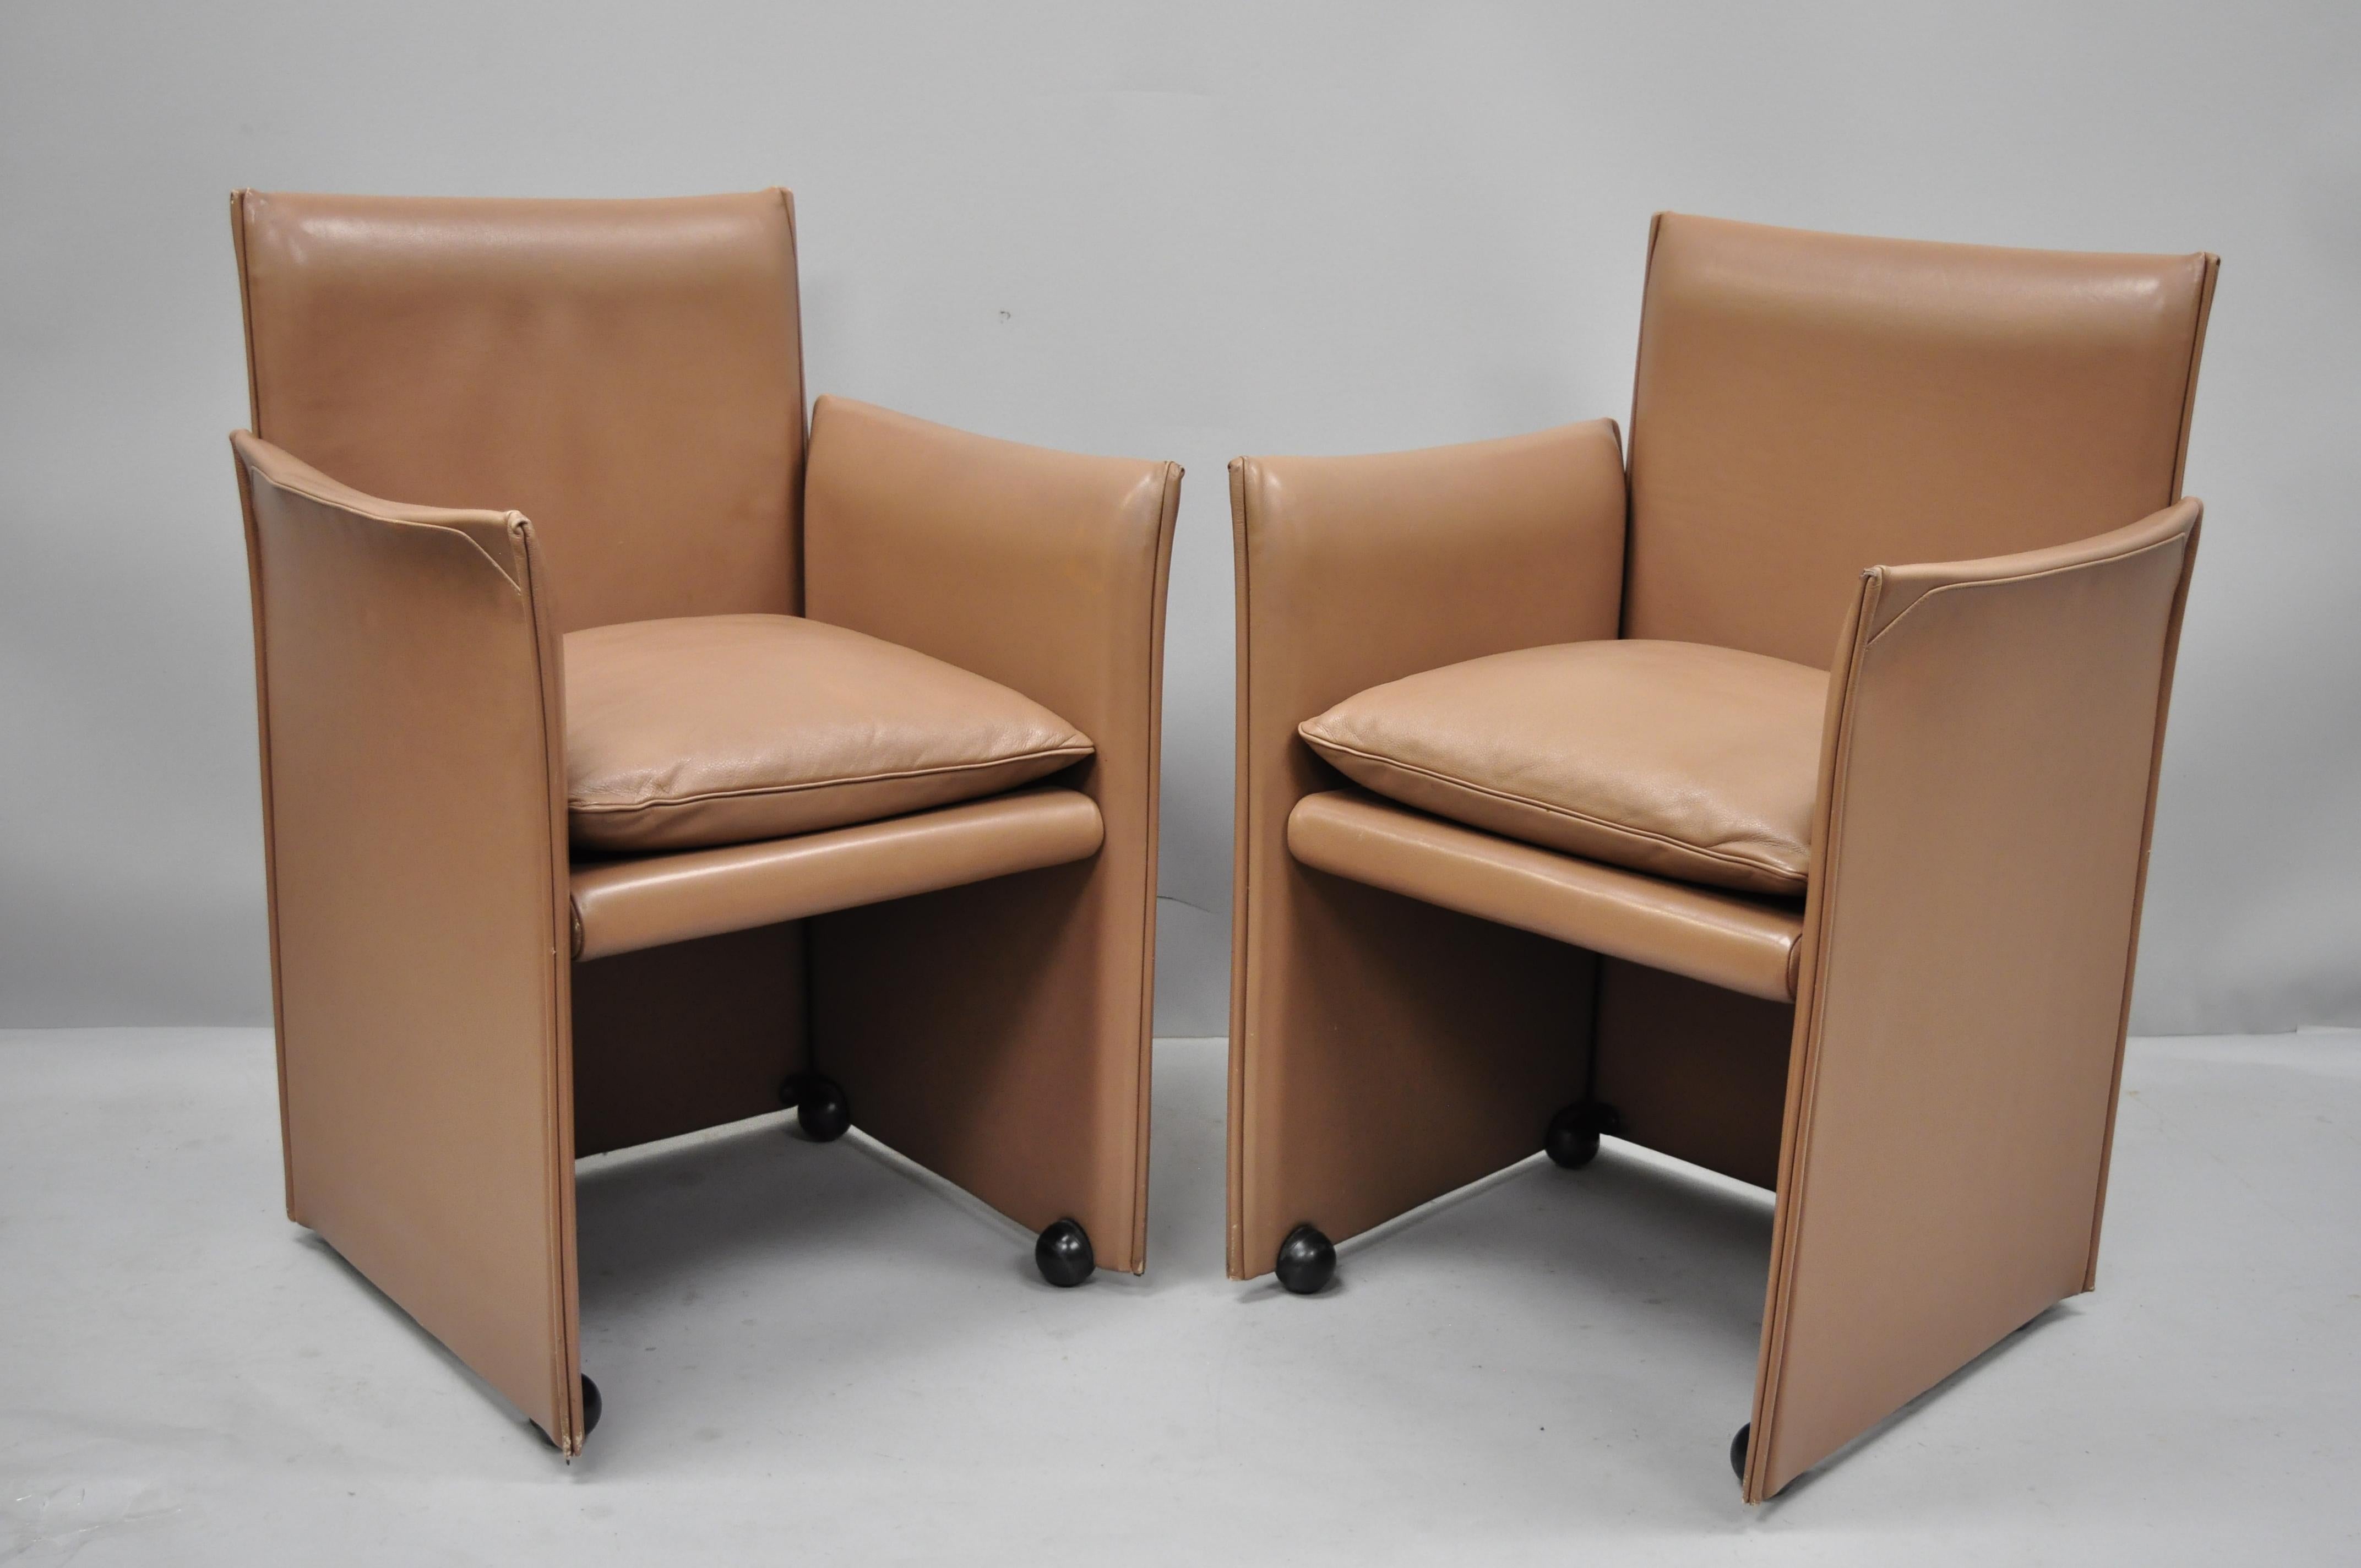 401 Break armchair by Mario Bellini for Cassina copper leather 6 chairs. Listing includes full leather wrapped frames, rolling casters, original label, clean modernist lines, and sleek sculpture form, circa Late 20th century. Measurements: 33